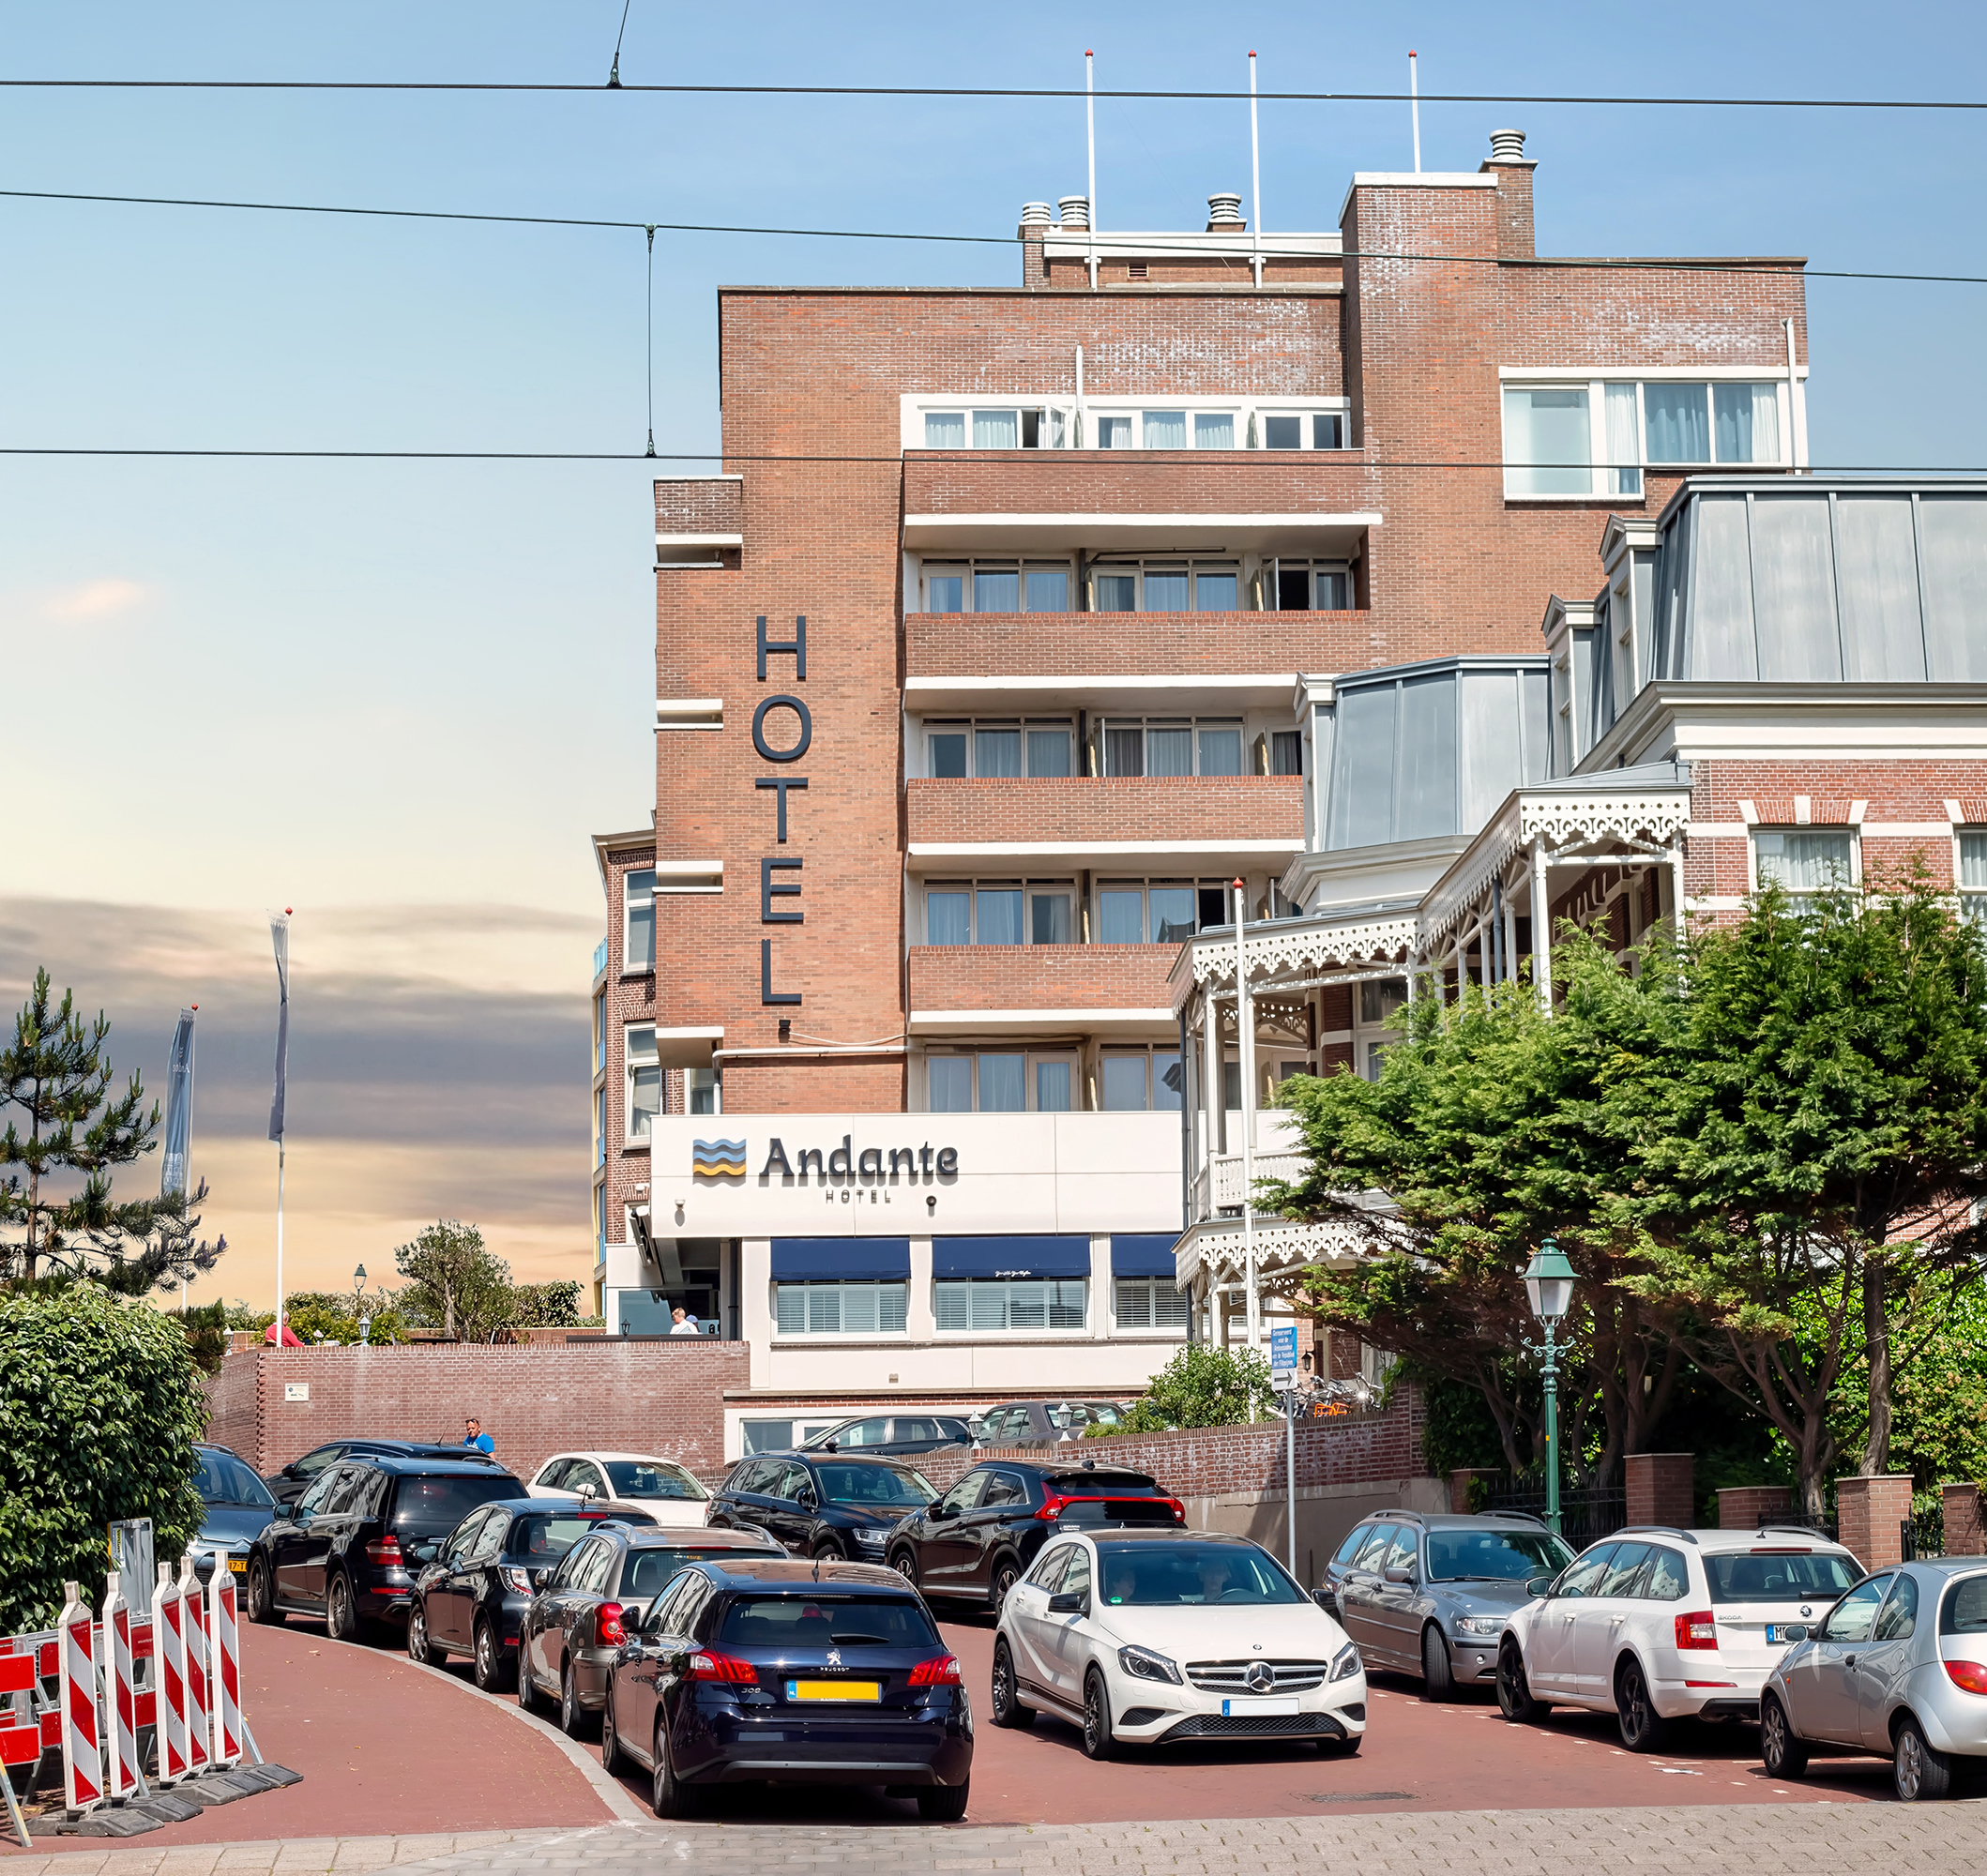 Hotel Andante aan Zee <br/>48.00 ew <br/> <a href='http://vakantieoplossing.nl/outpage/?id=914a2559a4a9717d72db7d38045828b8' target='_blank'>View Details</a>